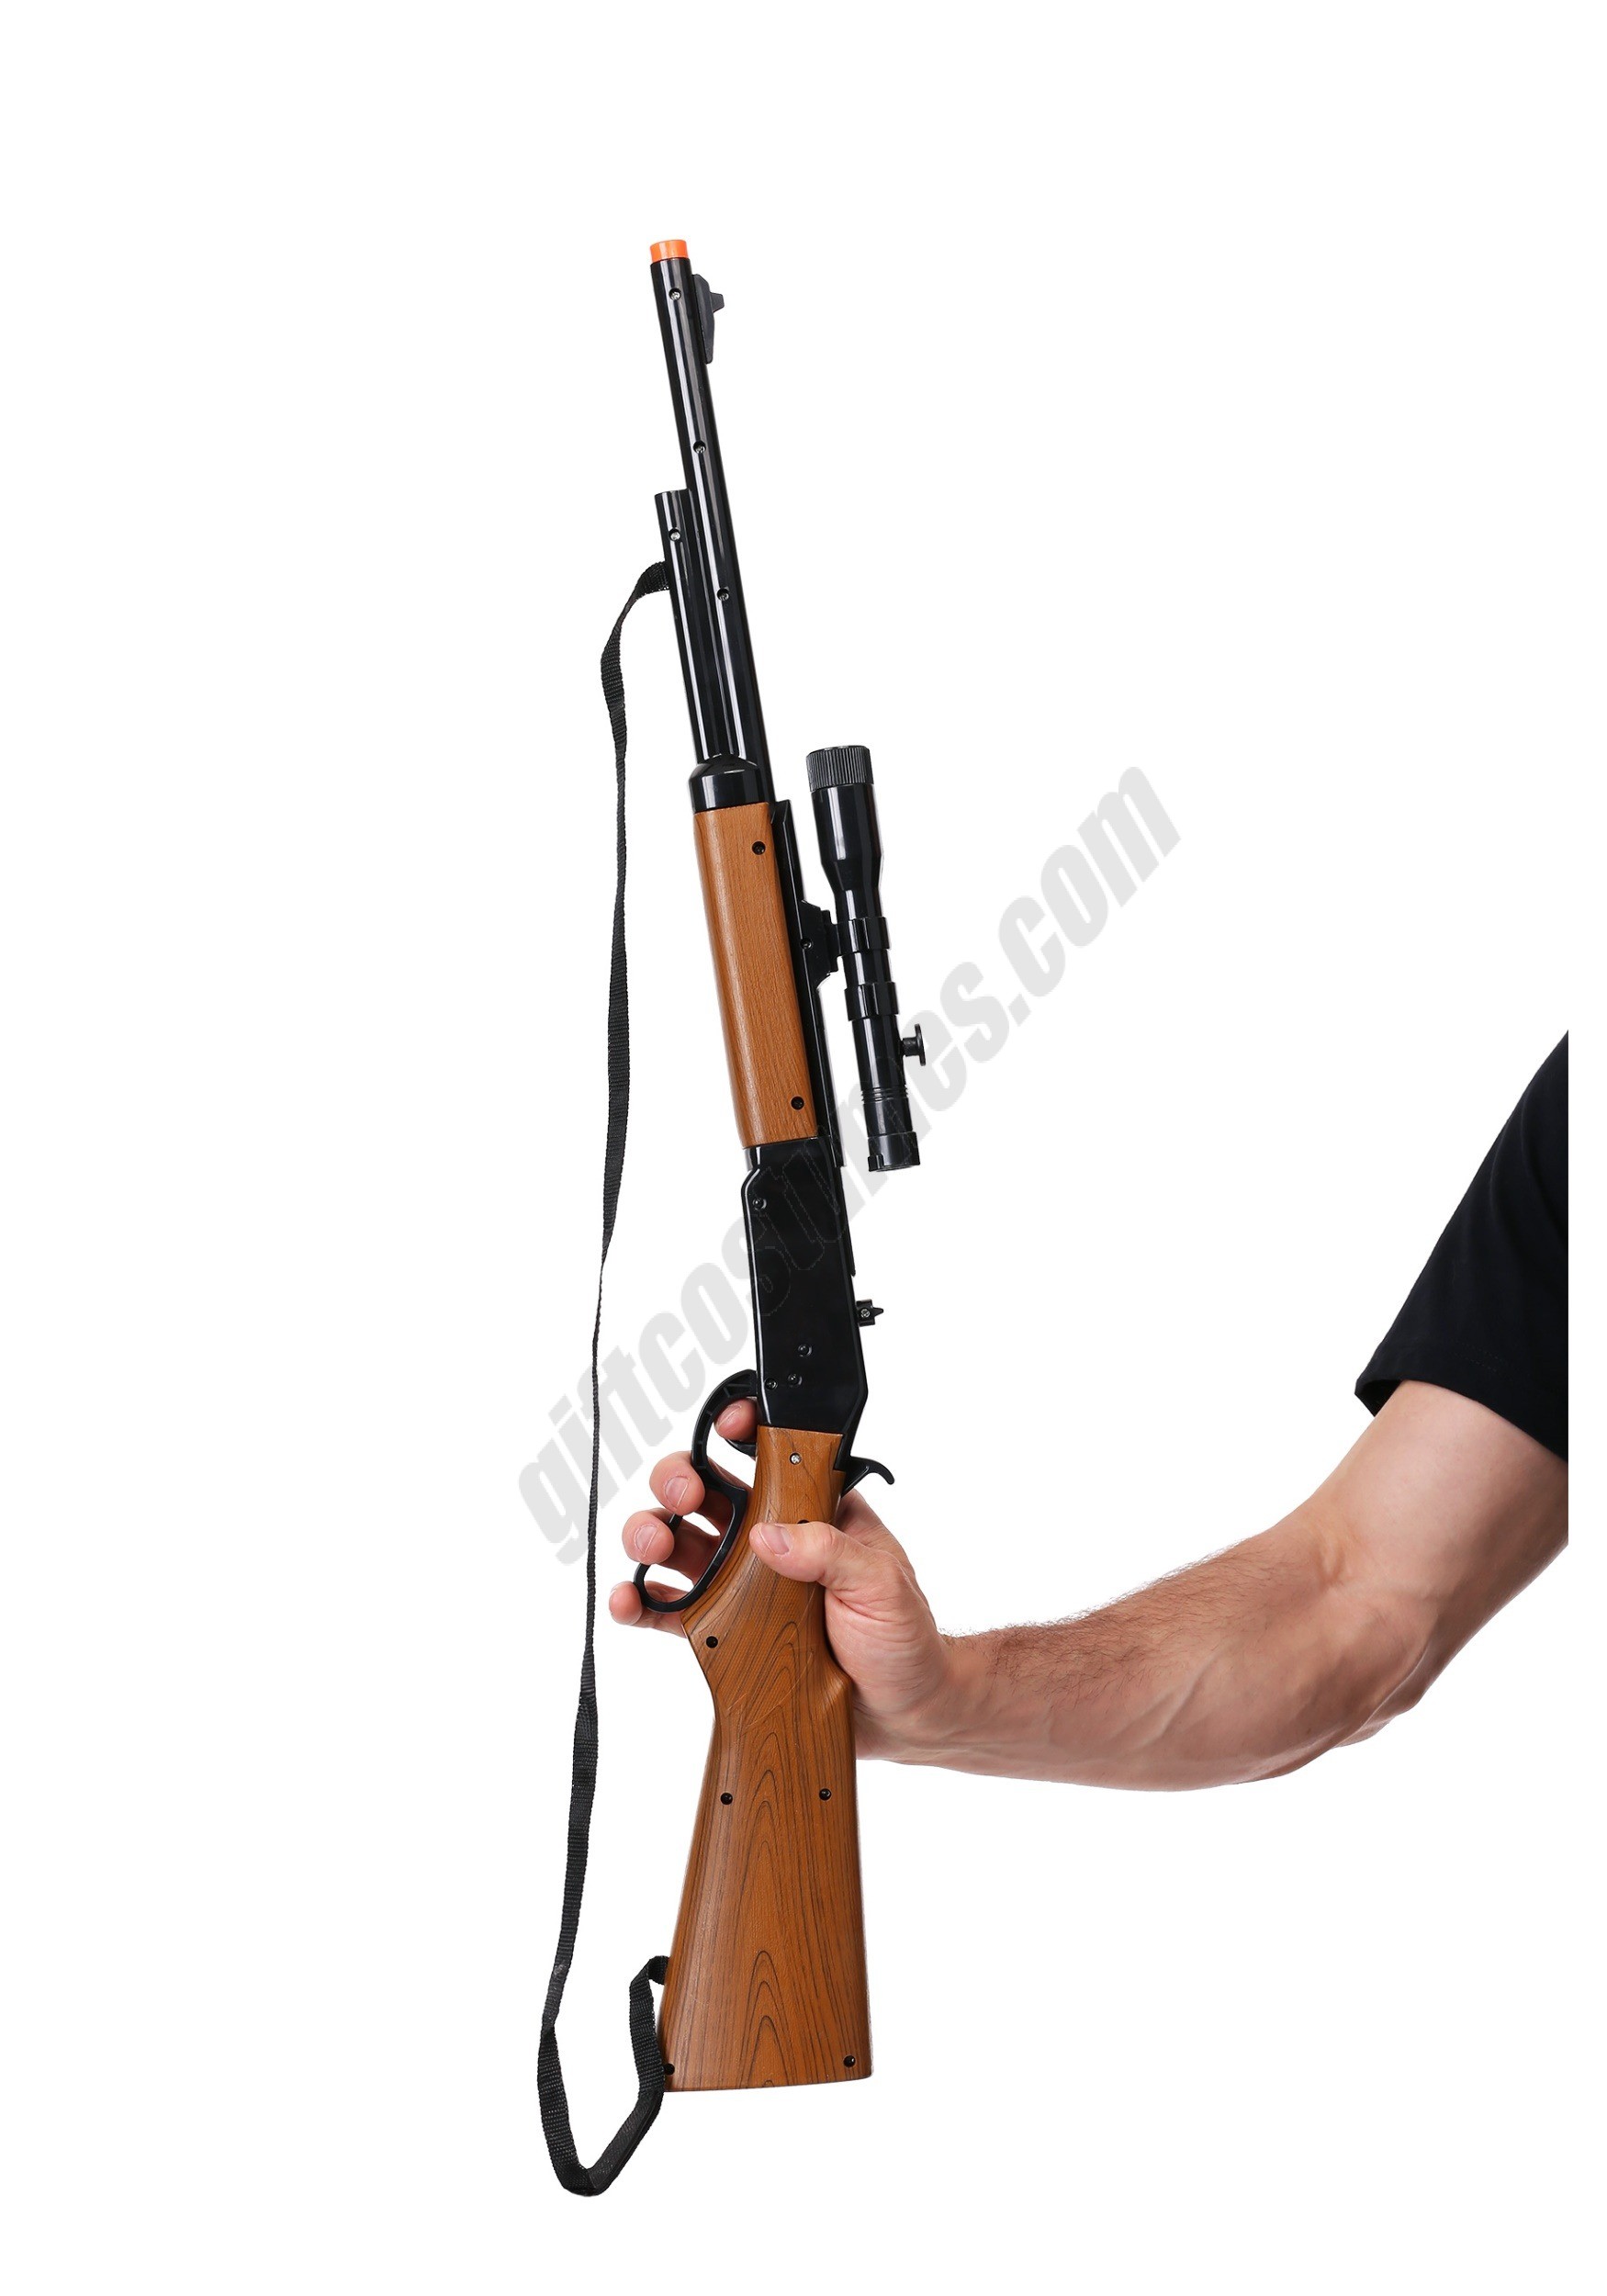 Lever Action Repeater Rifle with Scope Toy Weapon  Promotions - Lever Action Repeater Rifle with Scope Toy Weapon  Promotions